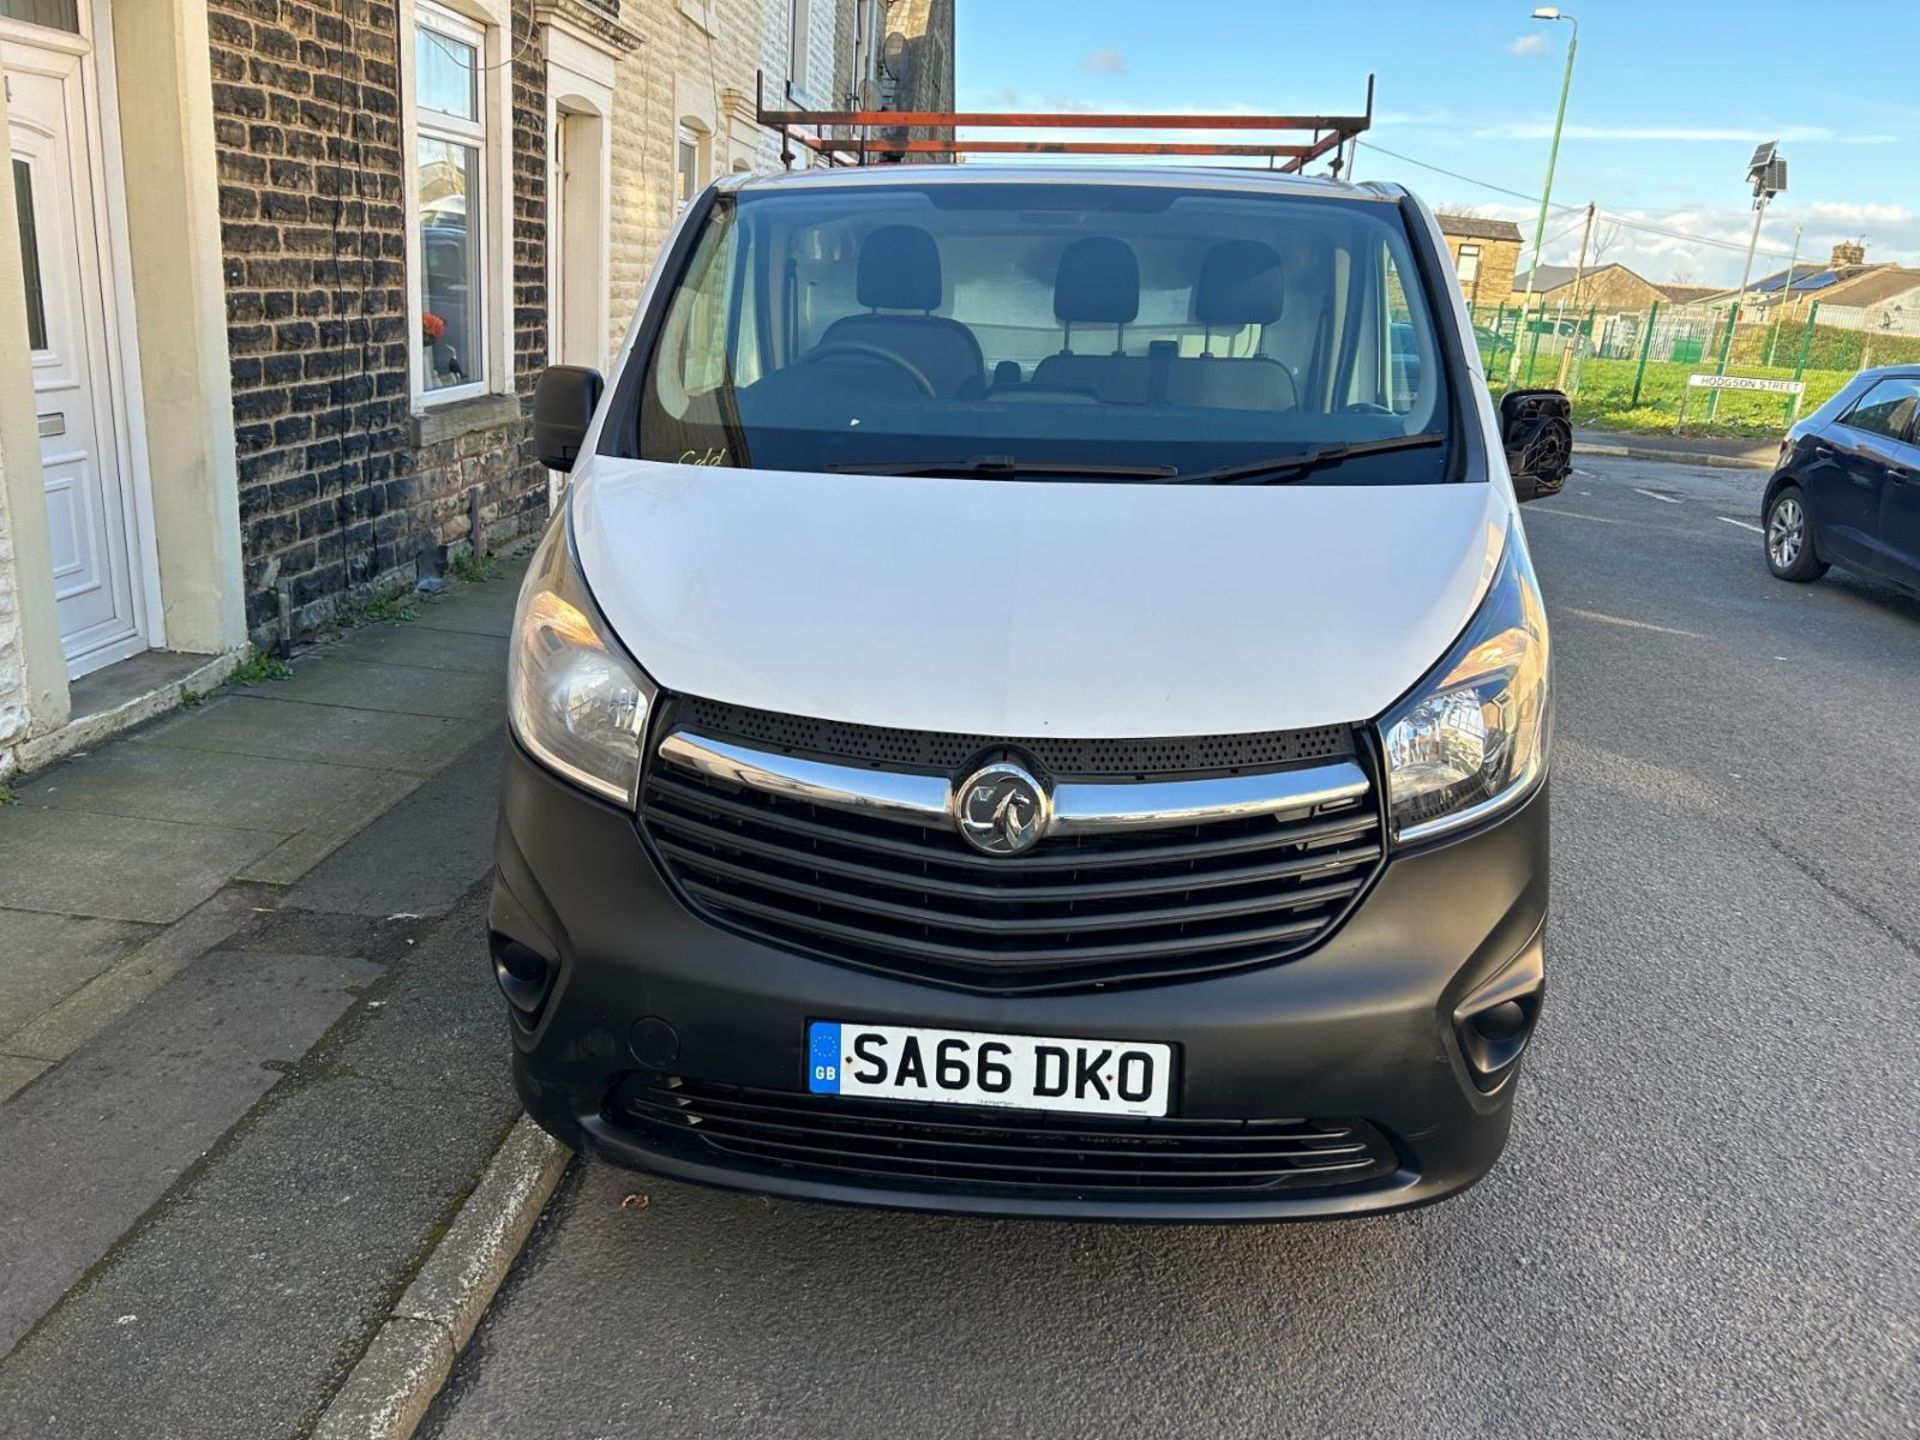 2016 VAUXHALL VIVARO SPORTIVE - ONLY 58K MILES - HPI CLEAR - READY FOR WORK! - Image 2 of 13